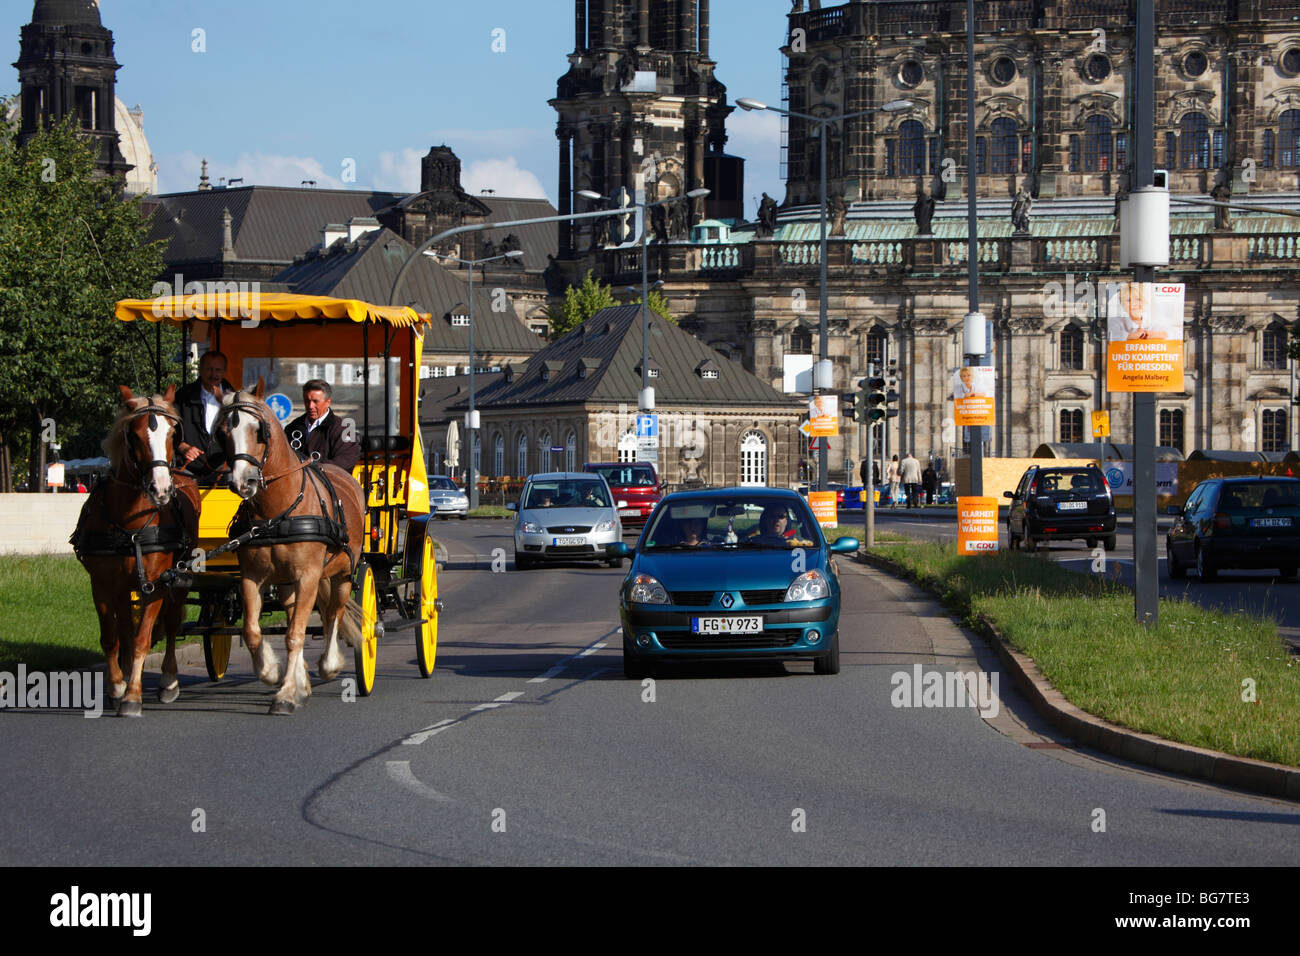 Germany, Saxony, Dresden, Tourist Horse and Carriage Rides along Terrassenufer Stock Photo